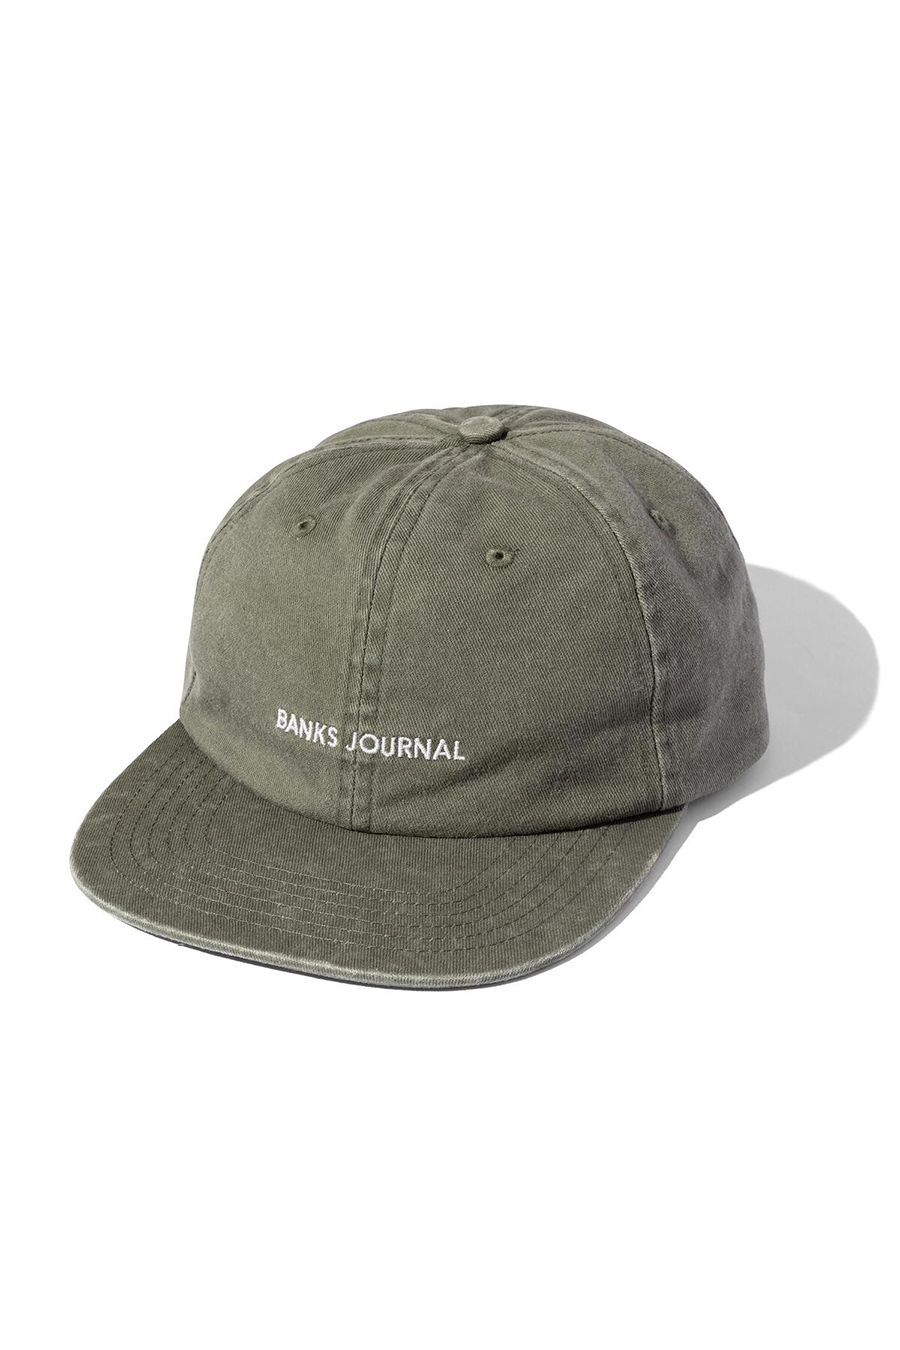 Label Hat | Seed - Main Image Number 1 of 1